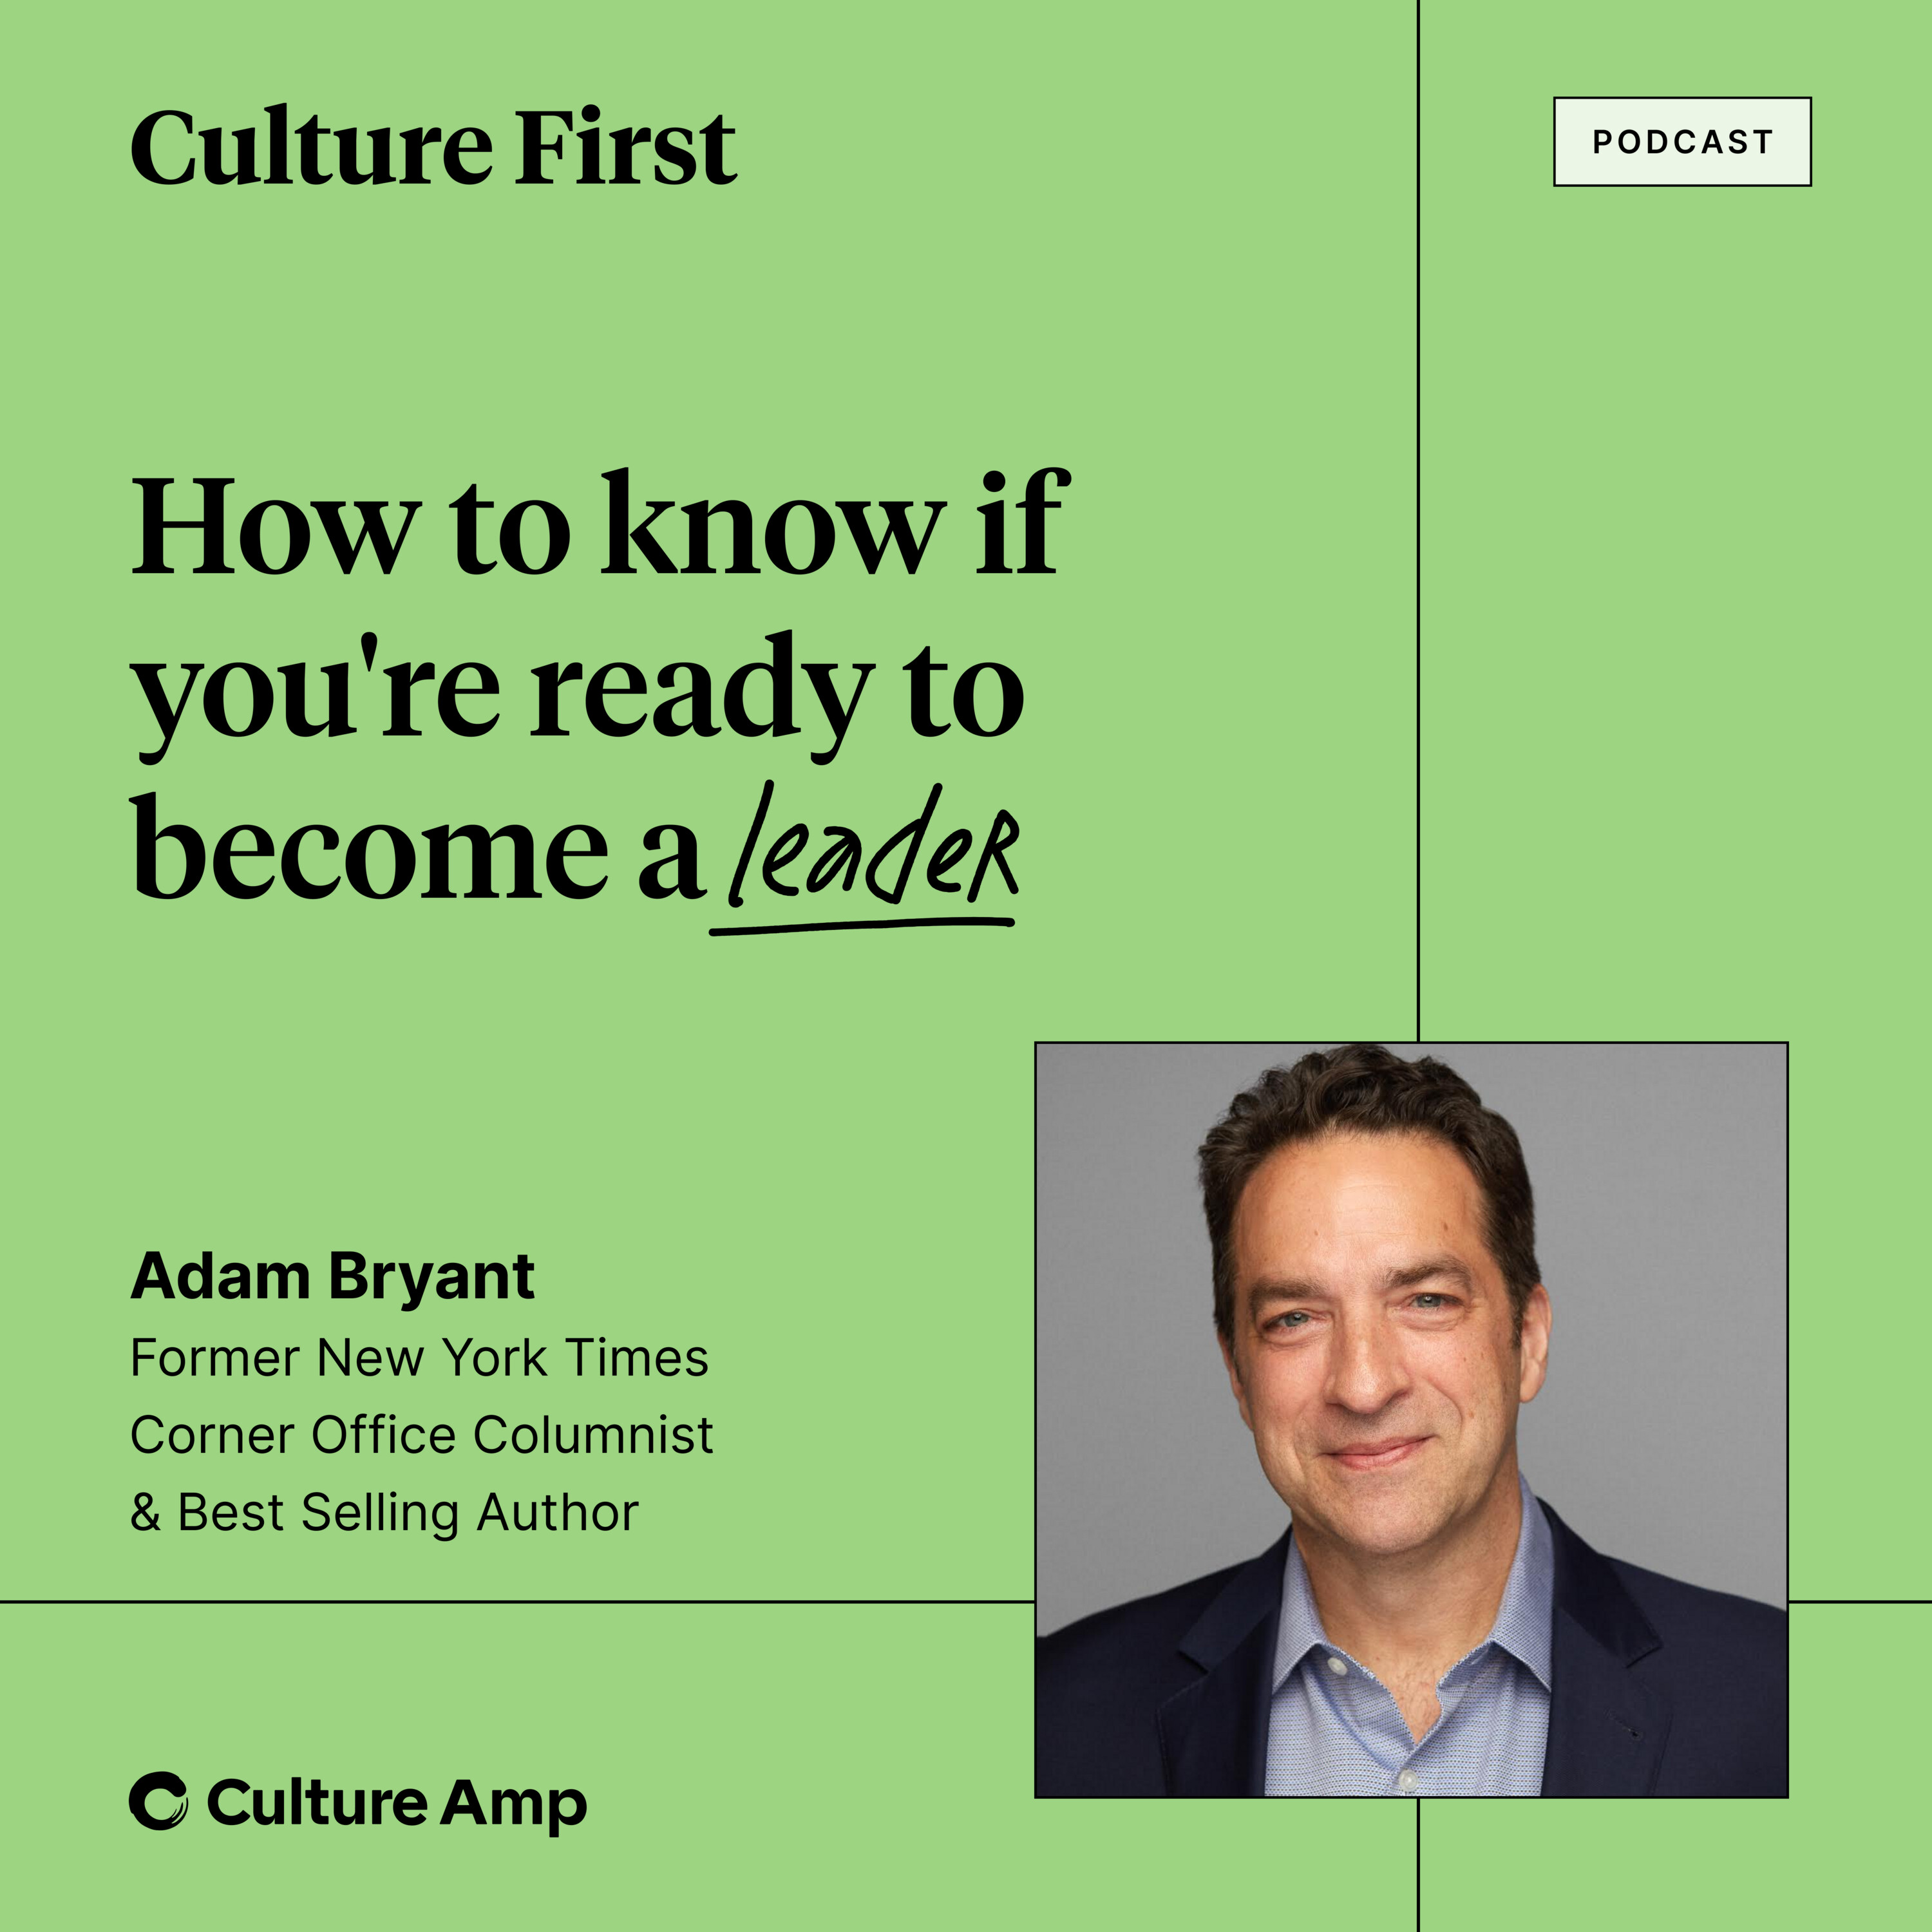 Adam Bryant on how to know if you’re ready to become a leader.